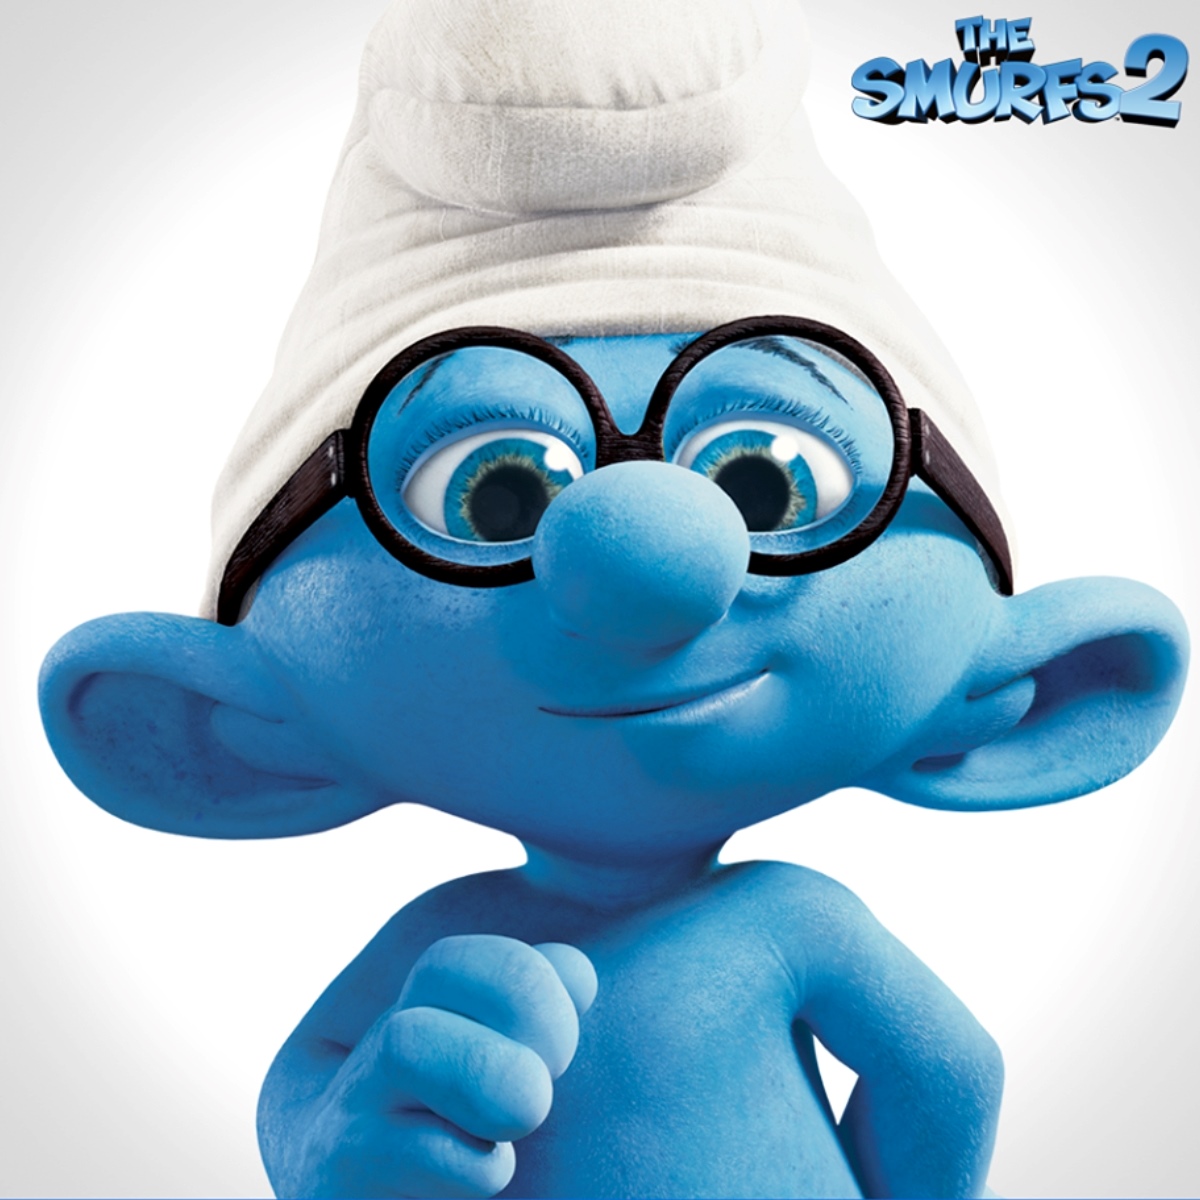 christine malcom recommends a picture of a smurf pic